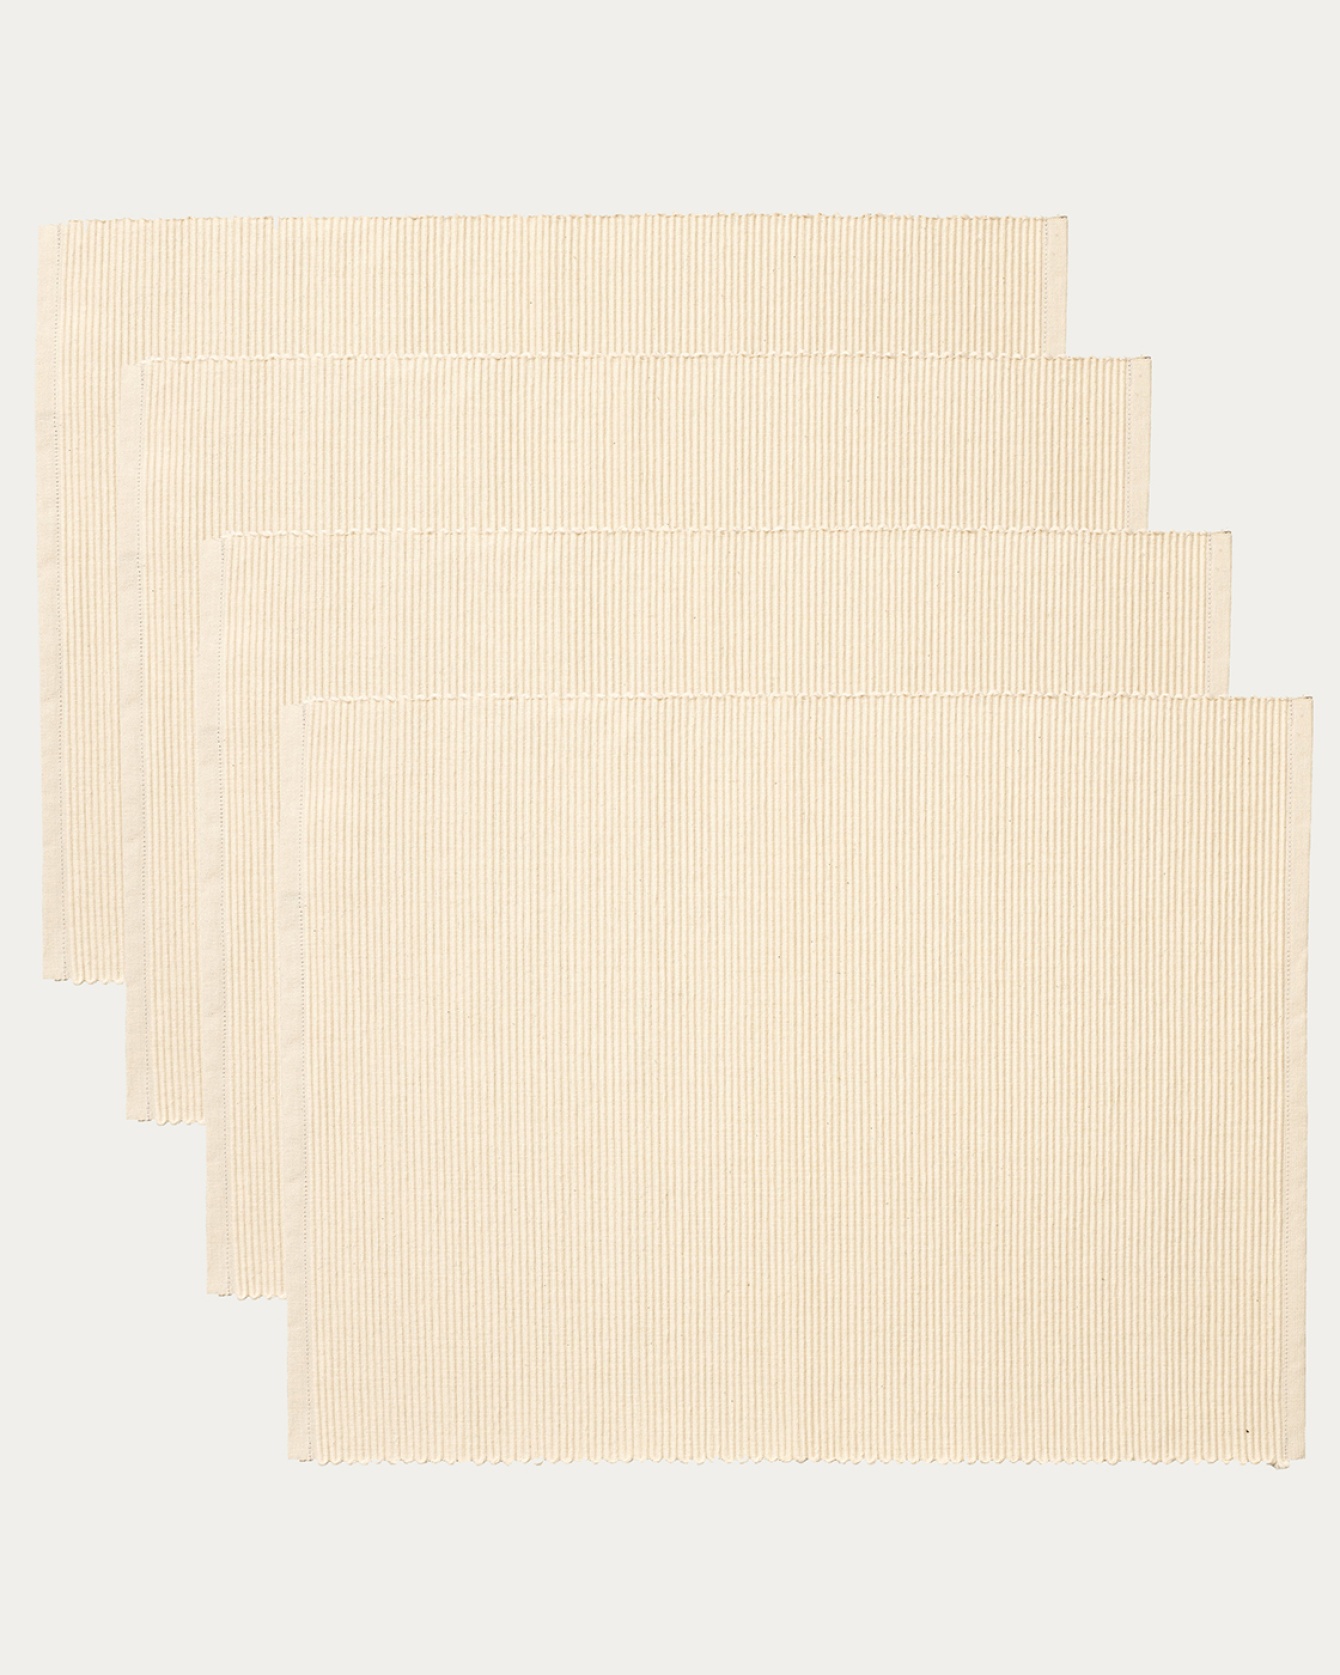 Product image creamy beige UNI placemat made of soft cotton in ribbed quality from LINUM DESIGN. Size 35x46 cm and sold in 4-pack.